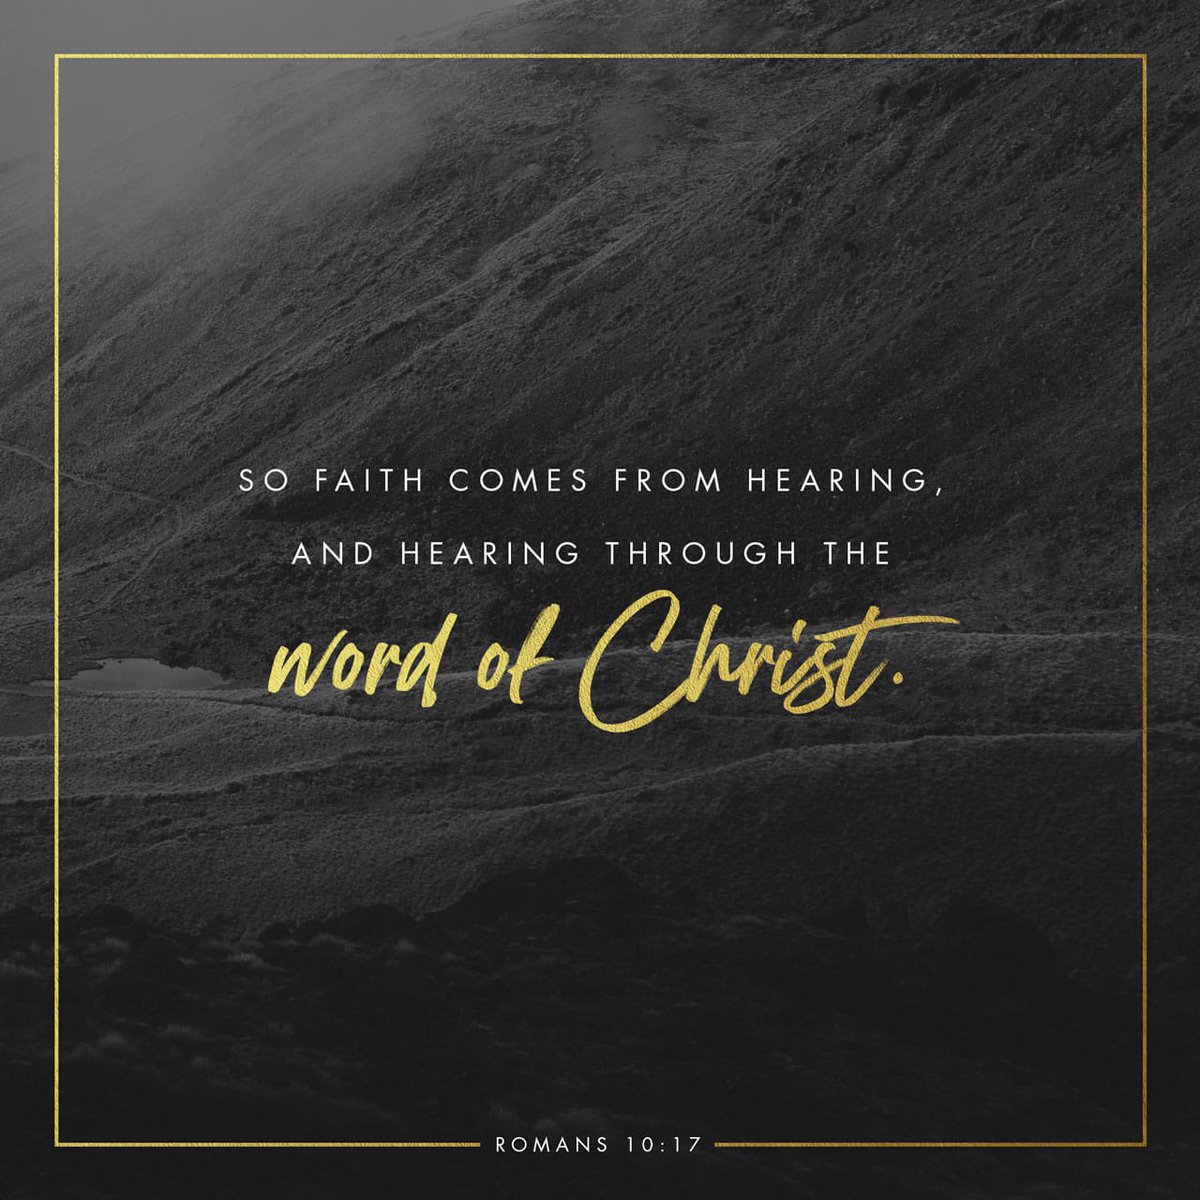 Only when we are brought to faith by the Holy Spirit working through the word of God is it possible for us to be saved.
.
.
#gracealonefaithalonescripturealone #faithinhearing #heargodsword #livegodsword #saved #holycrosswichita